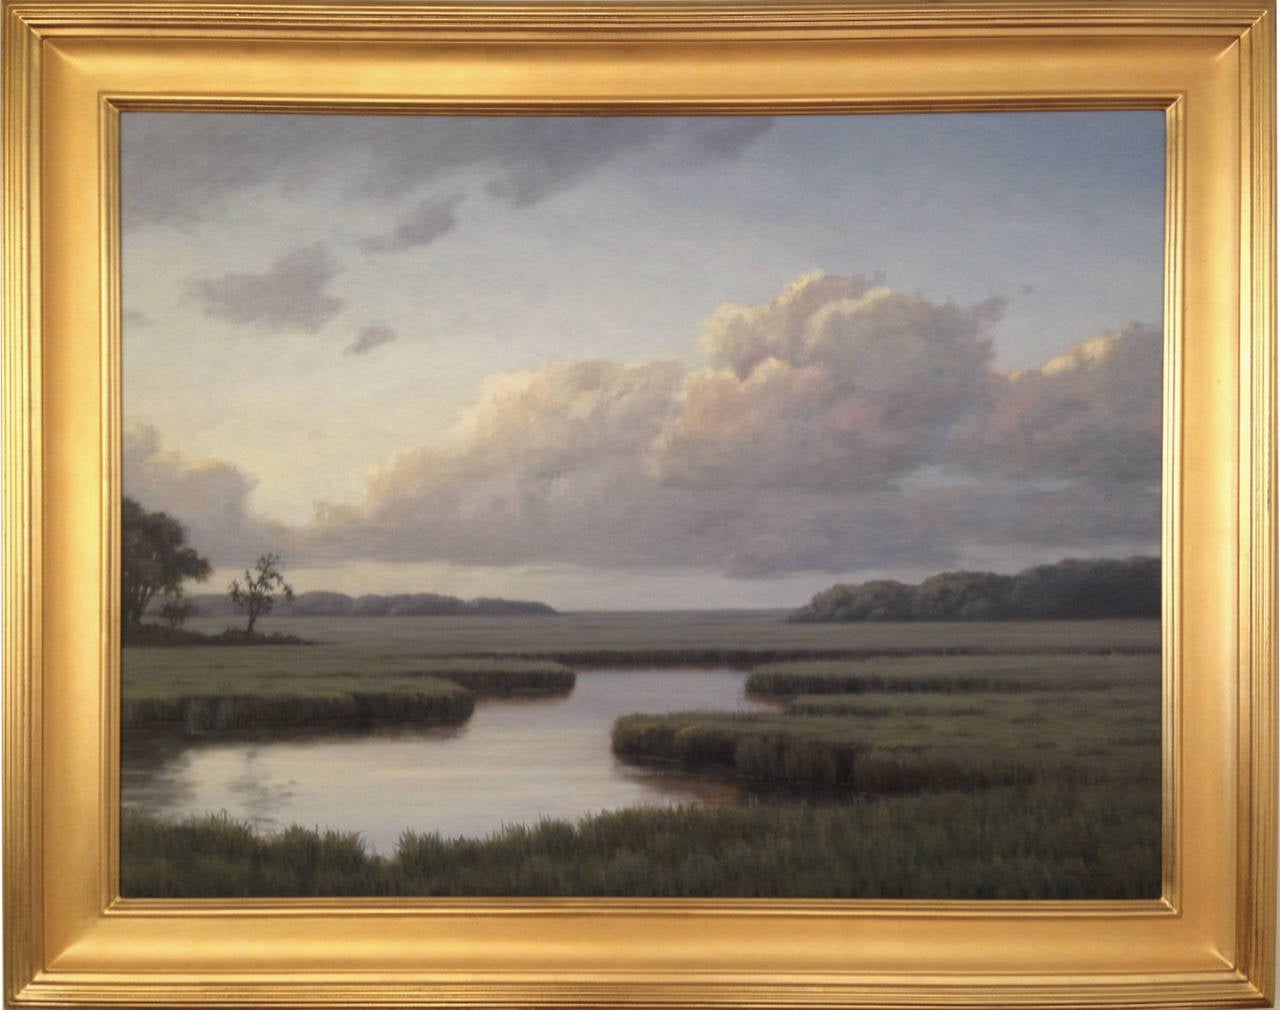 Late Day Beauty - Gray Landscape Painting by Ronald Tinney